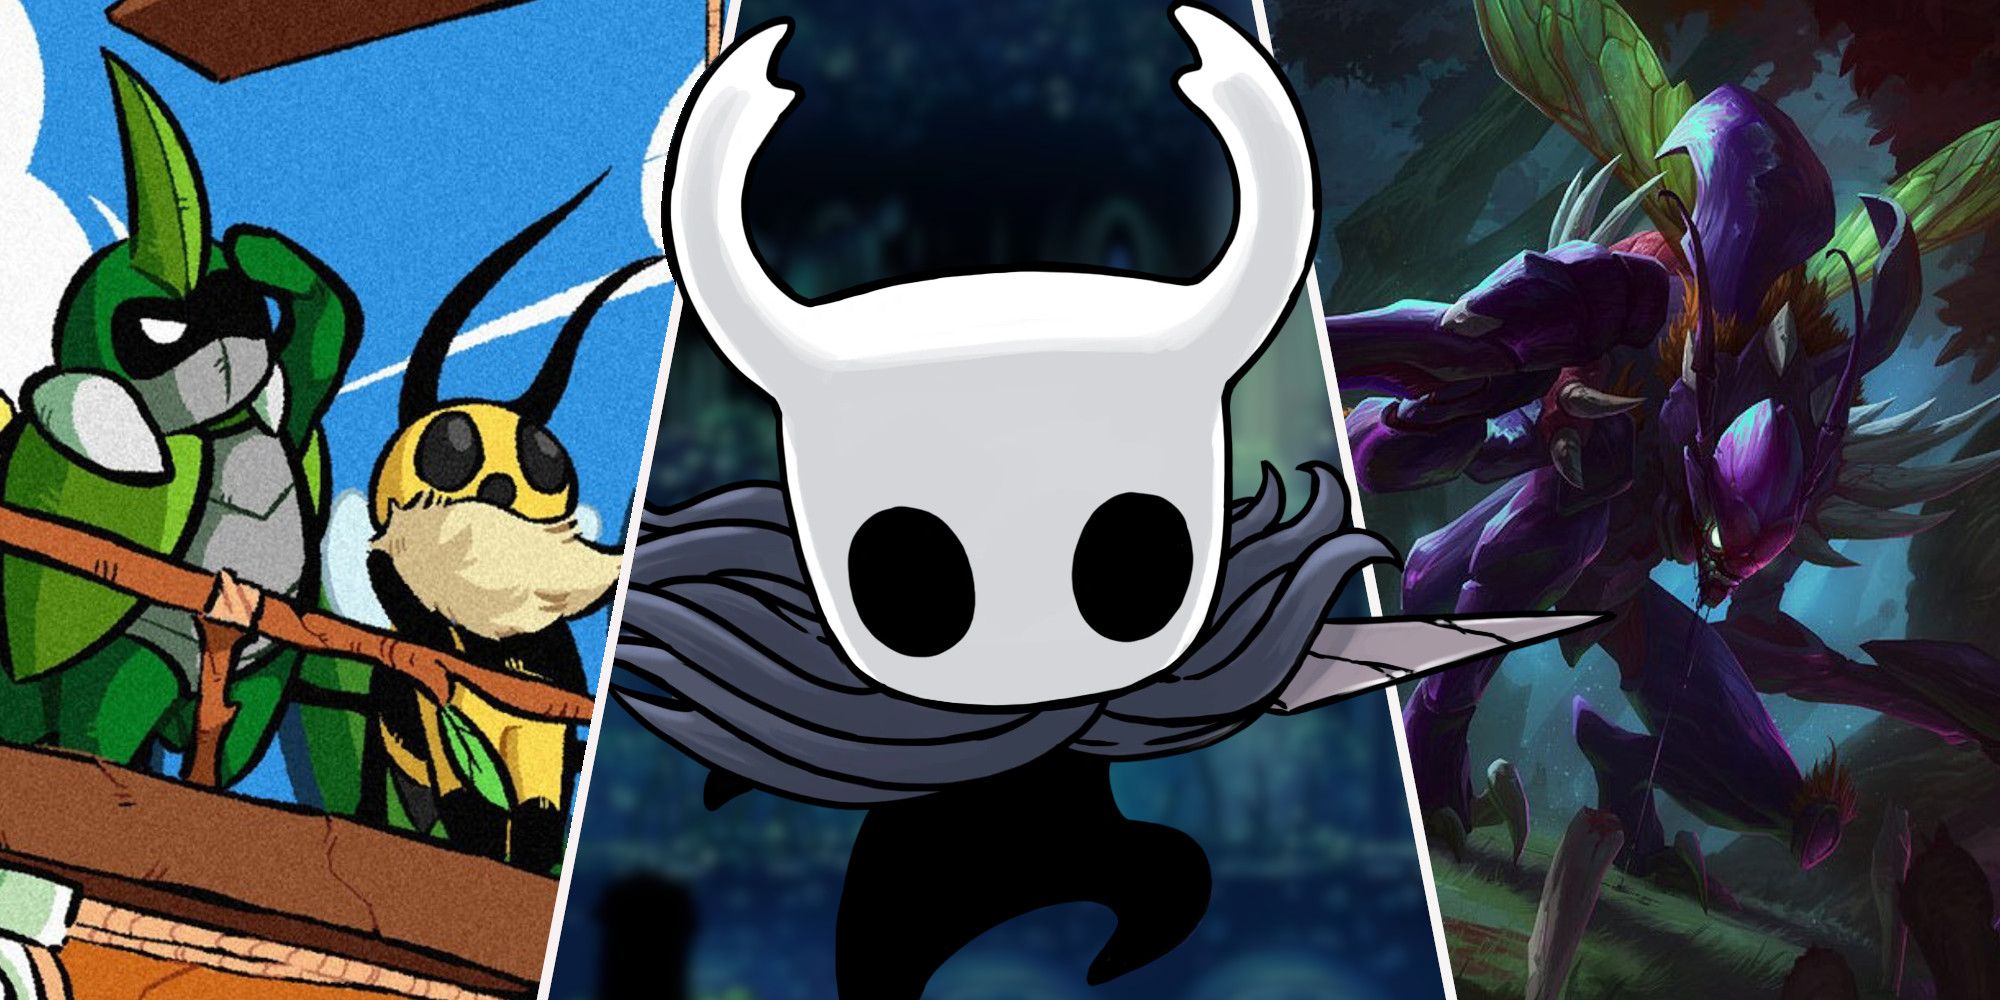 Best Bugs Split Image Of Bug Fables, Hollow Knight, And League of Legends